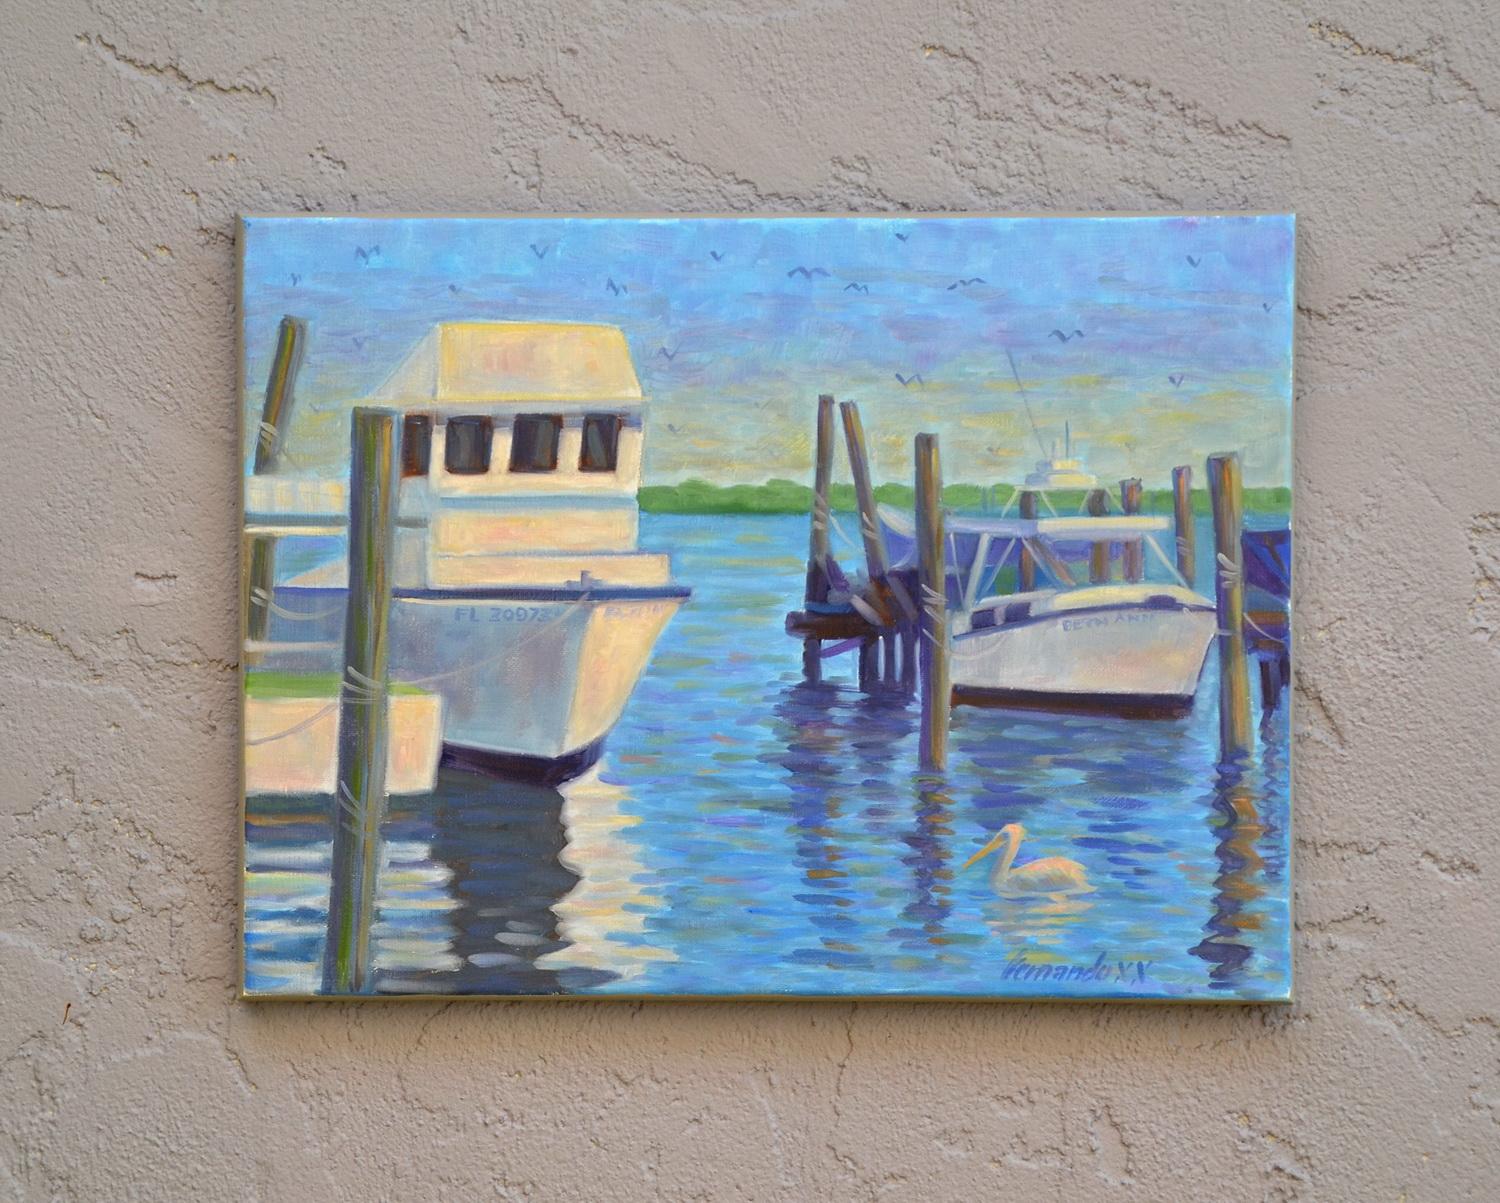 <p>Artist Comments<br />Lolita sits at the Cortez Village Marina after a day's work on the rolling waters of the Gulf of Mexico. The water ripples in purples, blues and green, reflecting the delicate sunset light. Part of Fernando's signature series